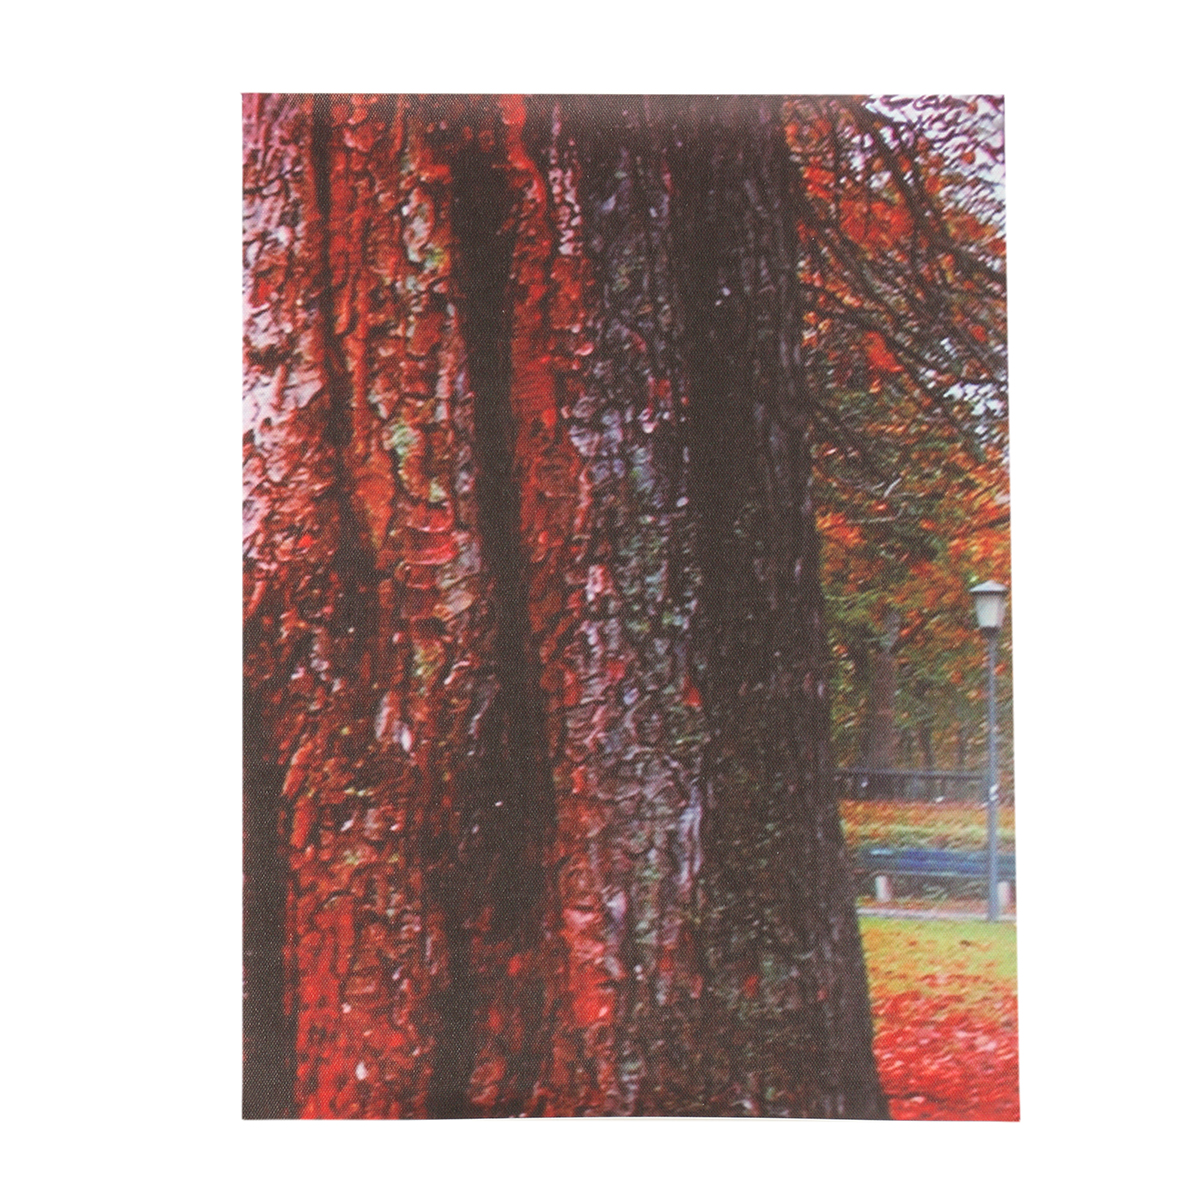 5Pcs-Red-Falling-Leaves-Canvas-Painting-Autumn-Tree-Wall-Decorative-Print-Art-Pictures-Unframed-Wall-1809936-11